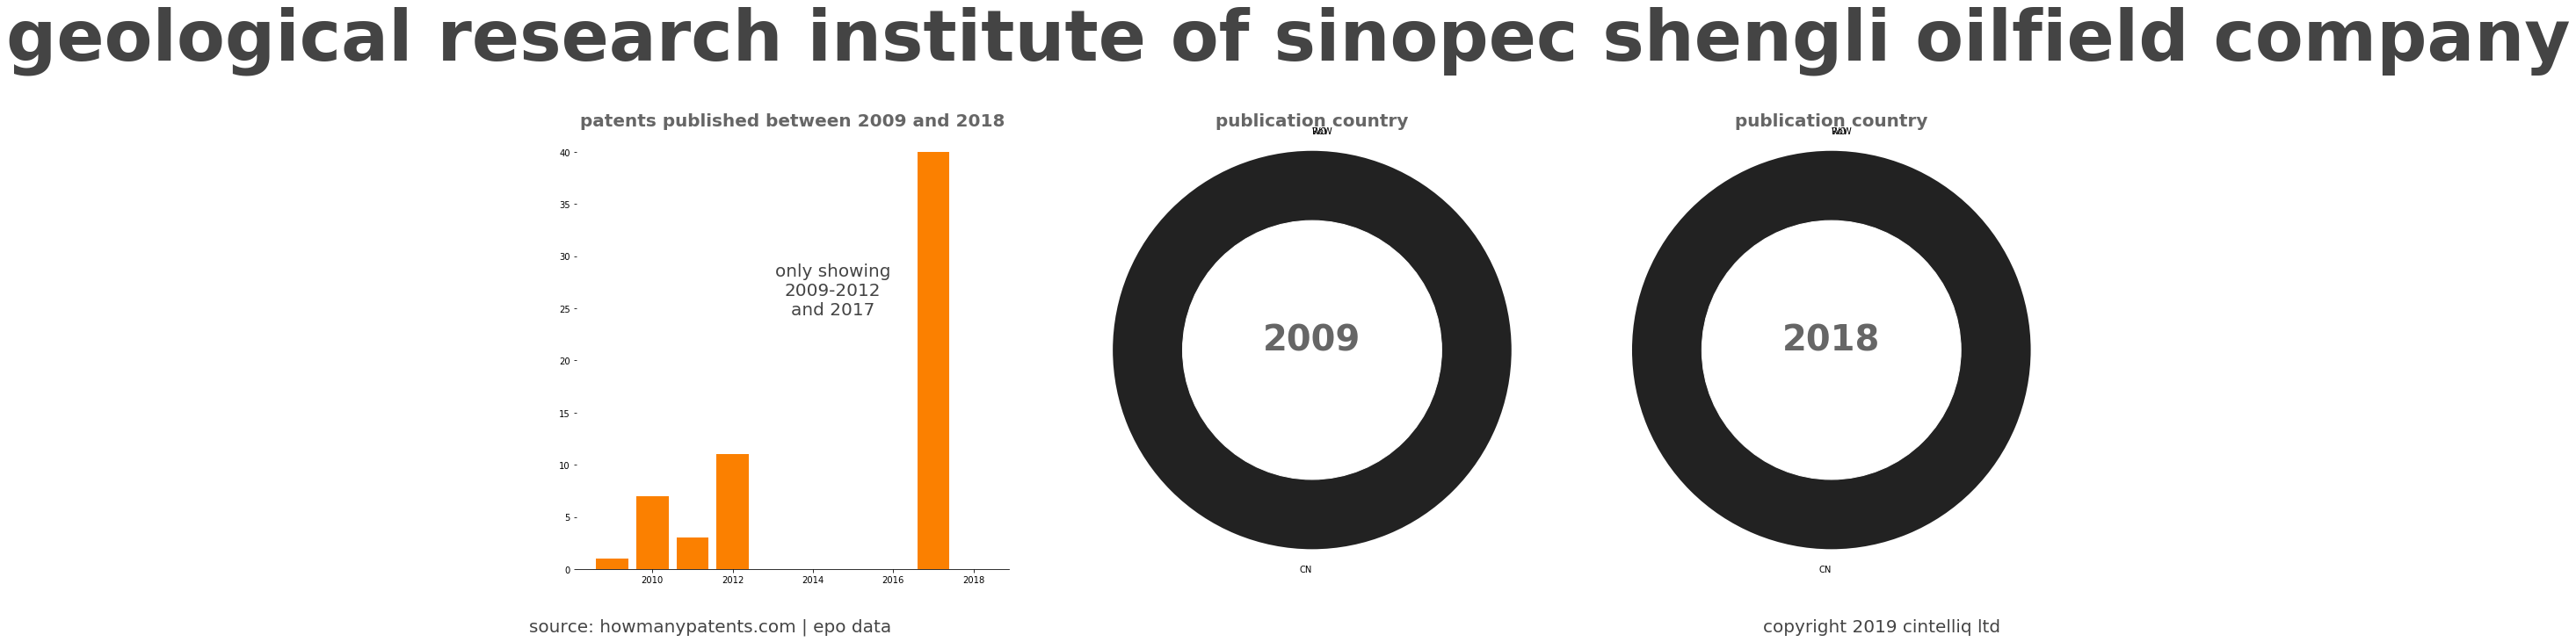 summary of patents for Geological Research Institute Of Sinopec Shengli Oilfield Company